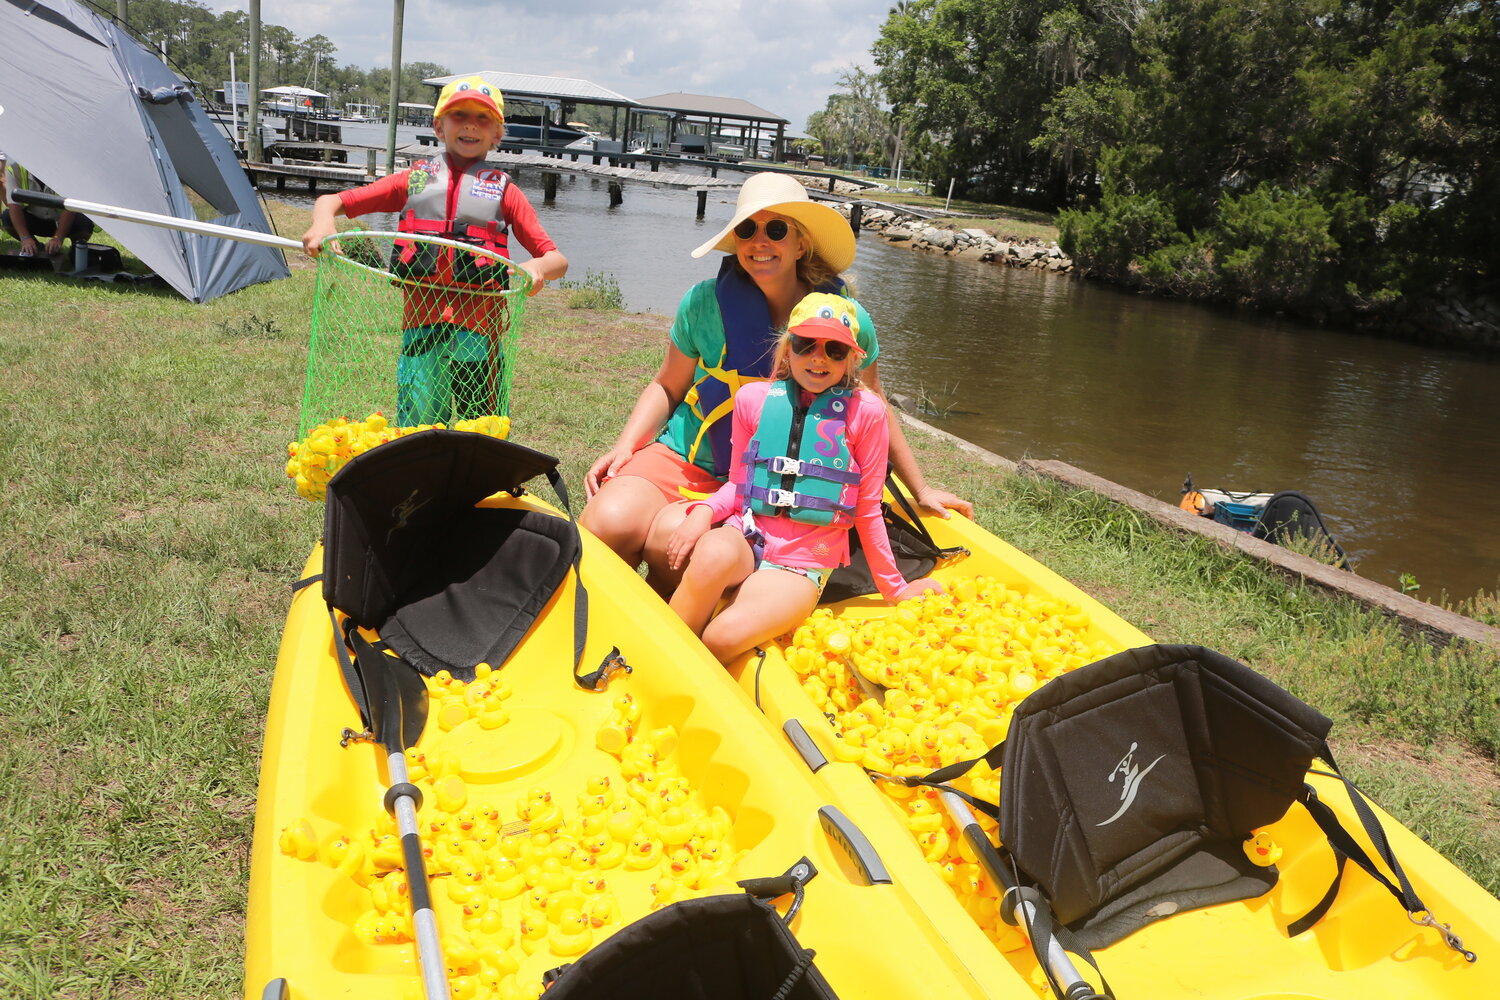 The Rotary Club of Ponte Vedra held its annual Rubber Duck Race on May 21. Many kayakers helped in the effort of corralling 3,000 rubber ducks after they were dropped into the Intracoastal Waterway from the Palm Valley Bridge.